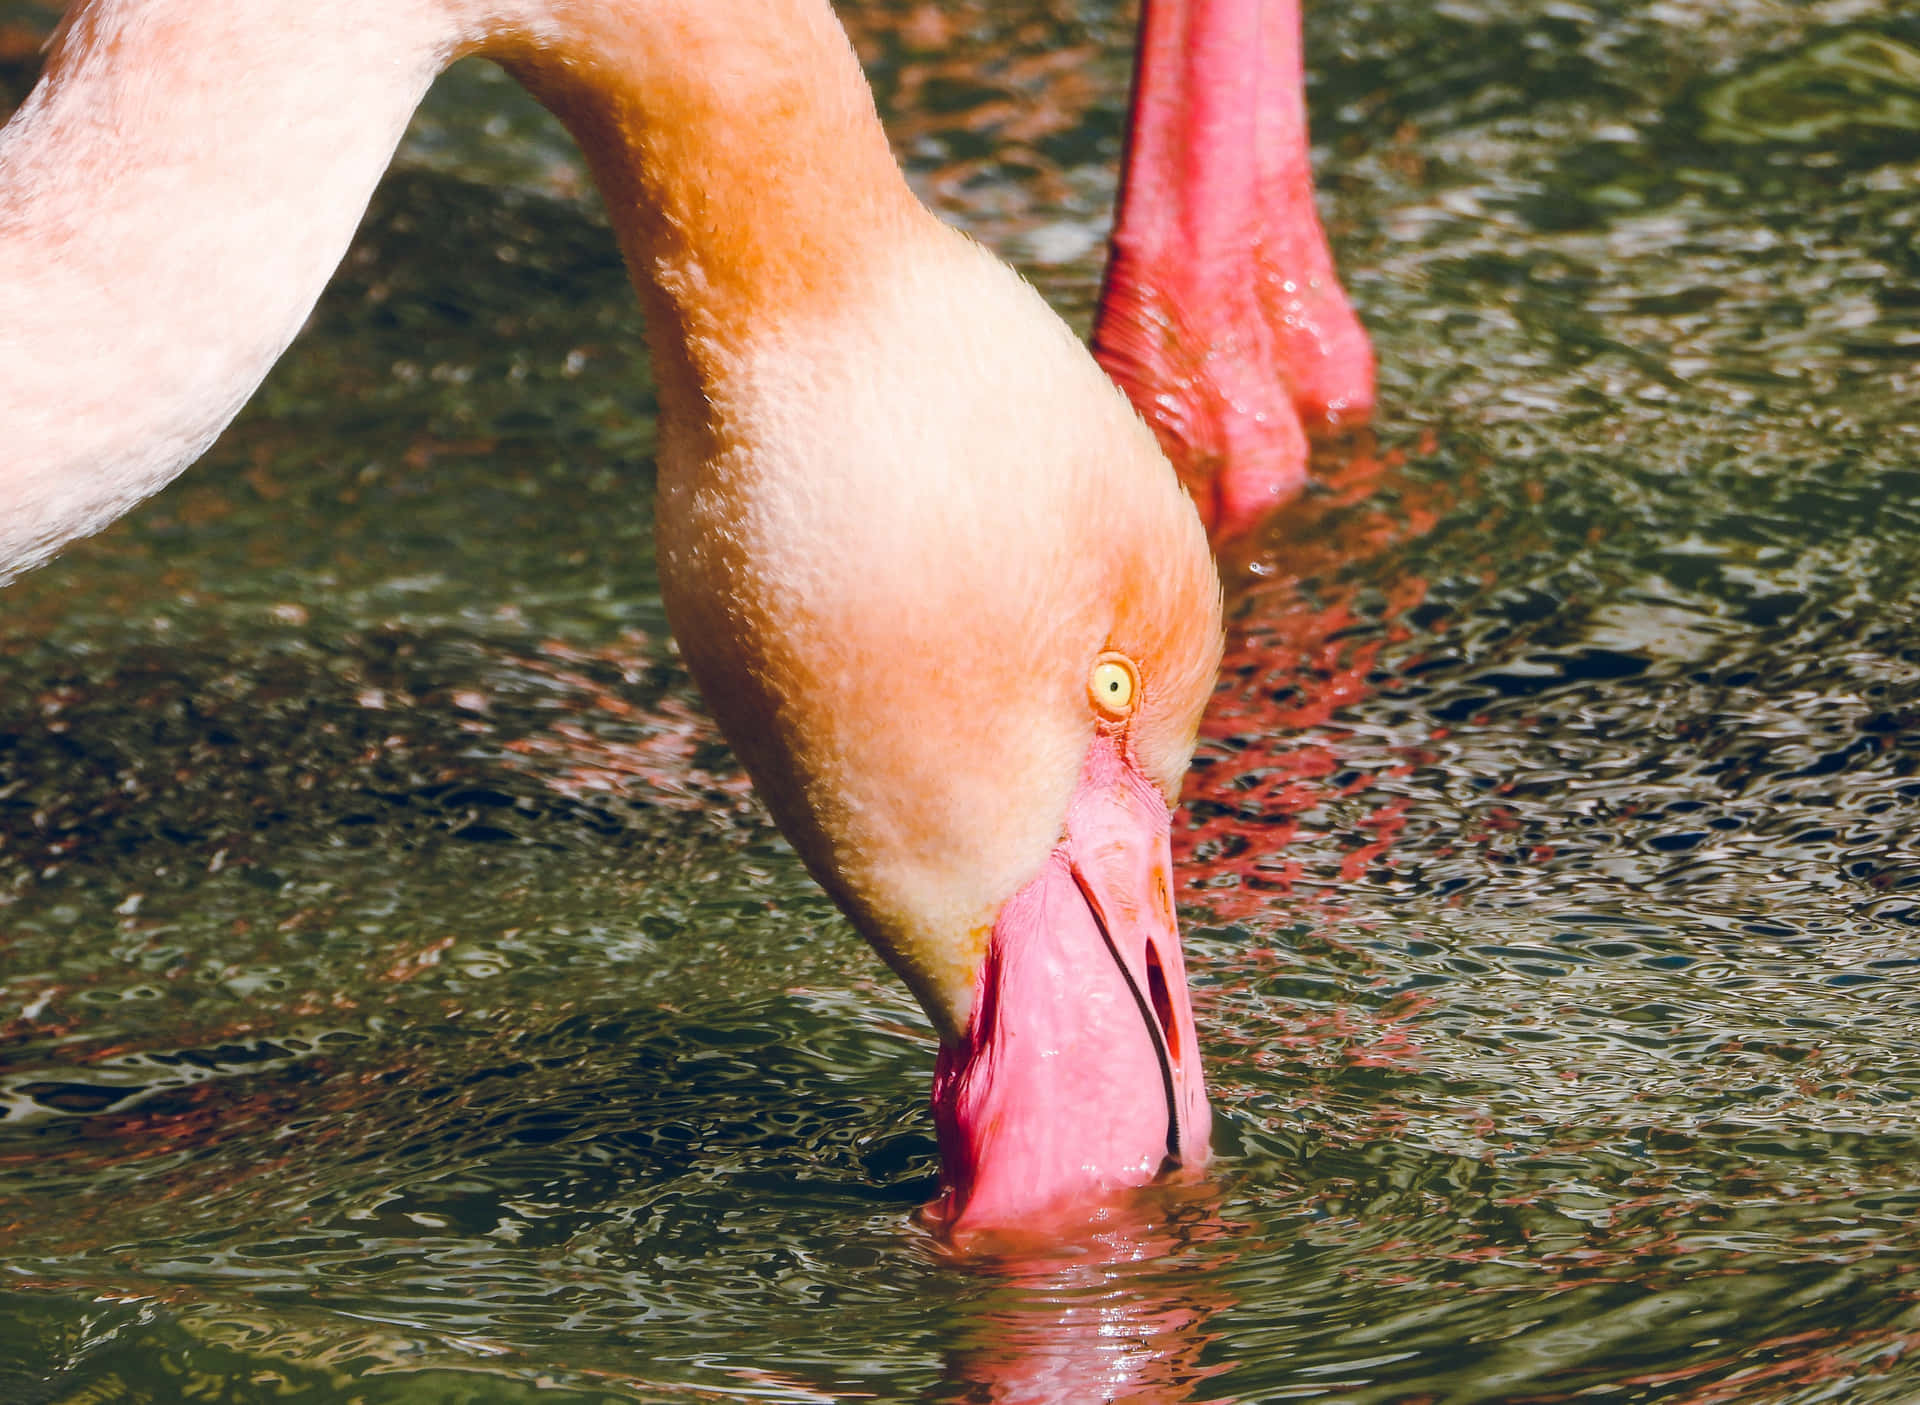 The beauty of nature -- a flamingo in its natural habitat